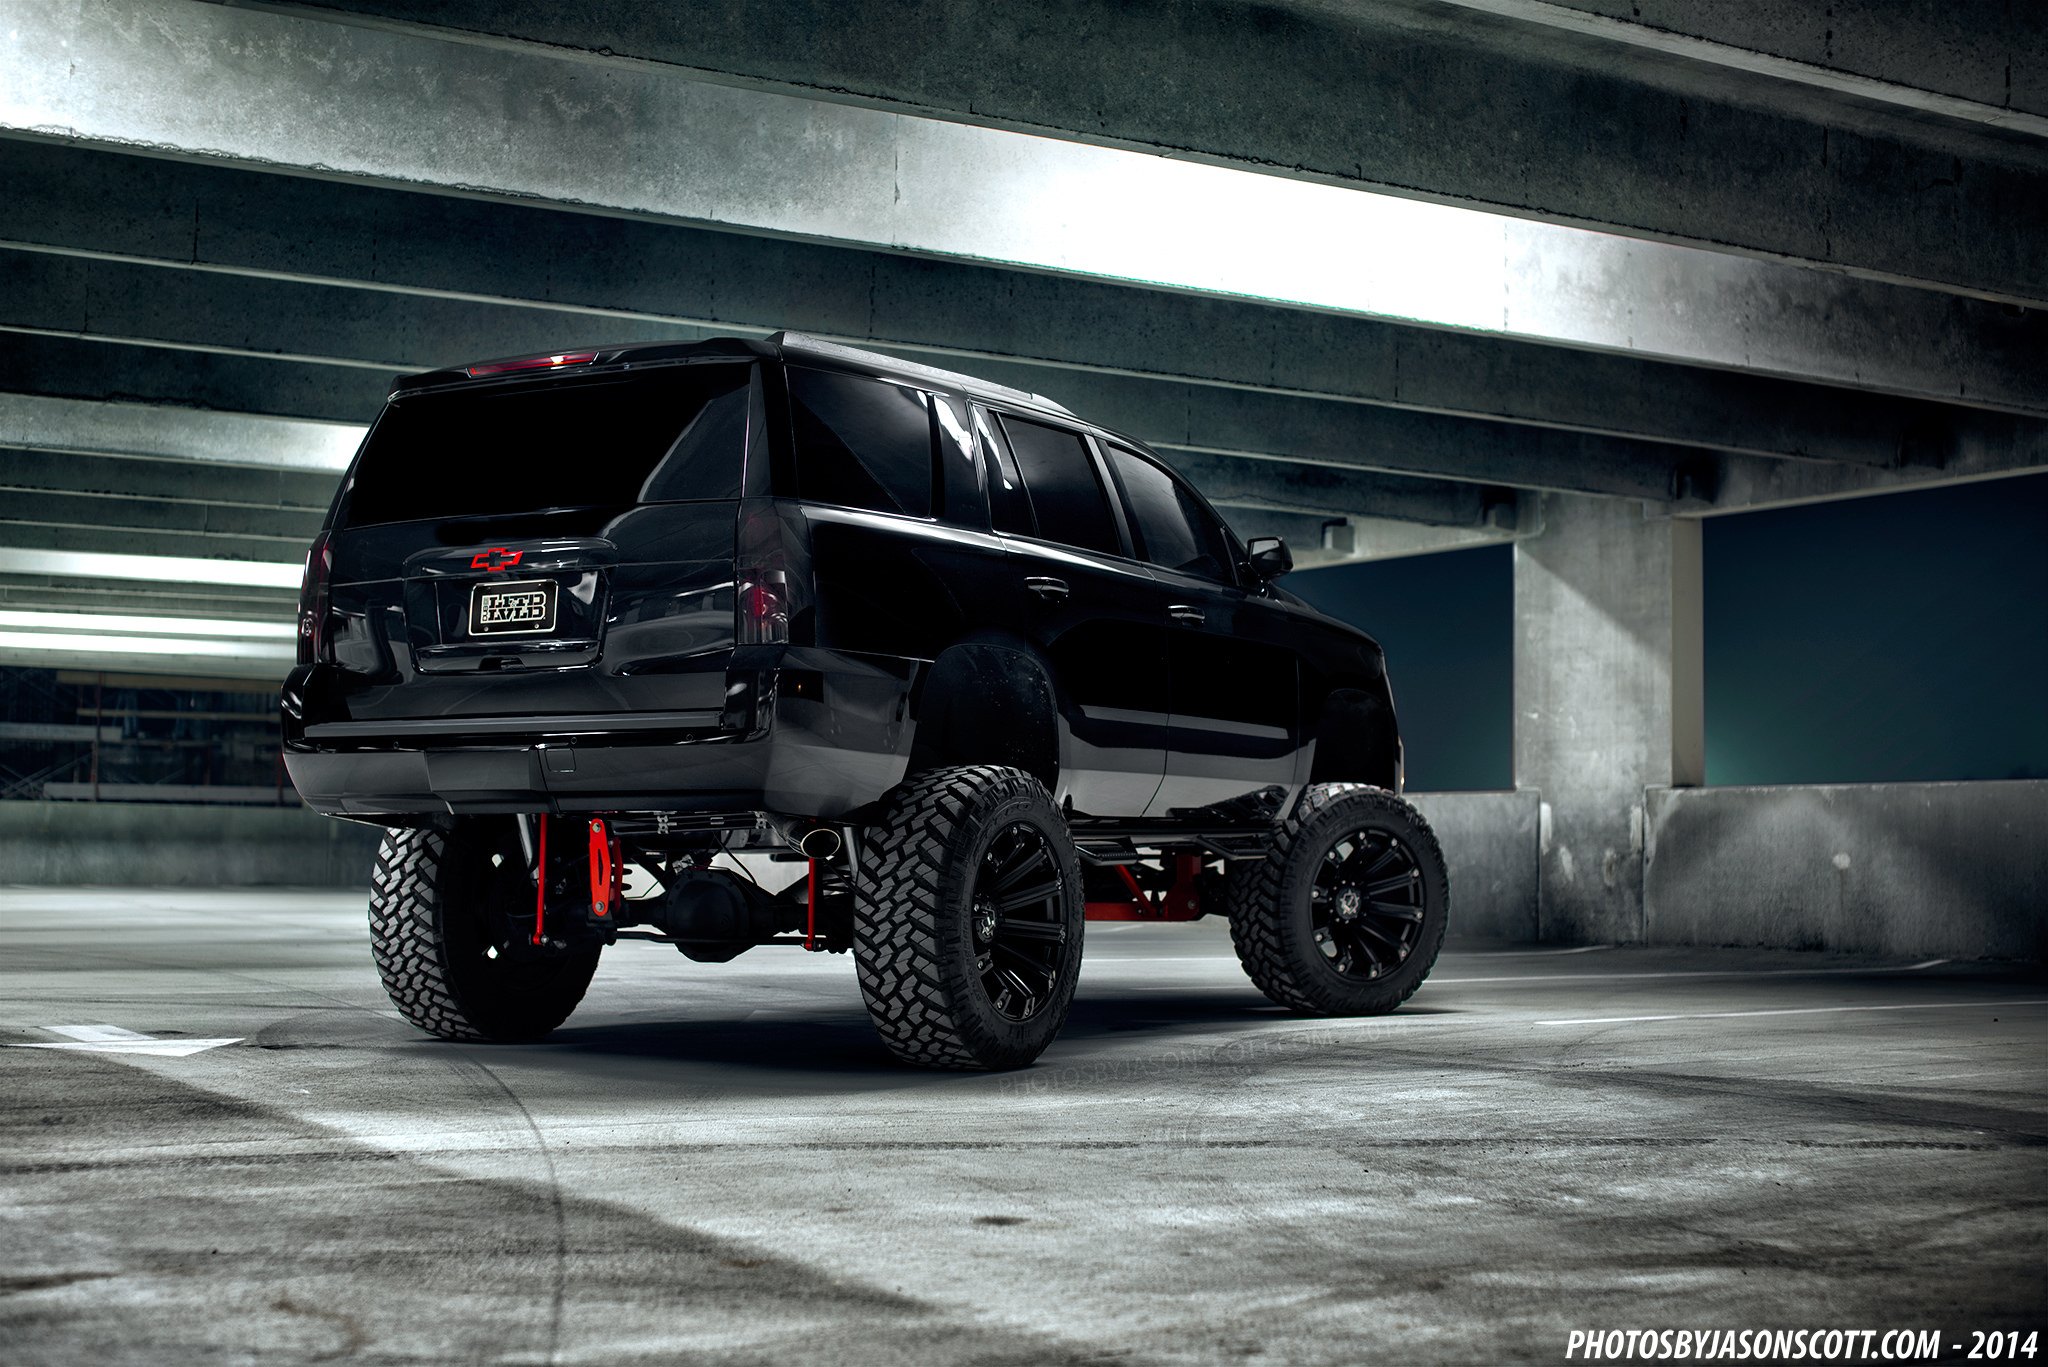 Chevy Tahoe on 37 inch Tires - Photo by Jason Scott